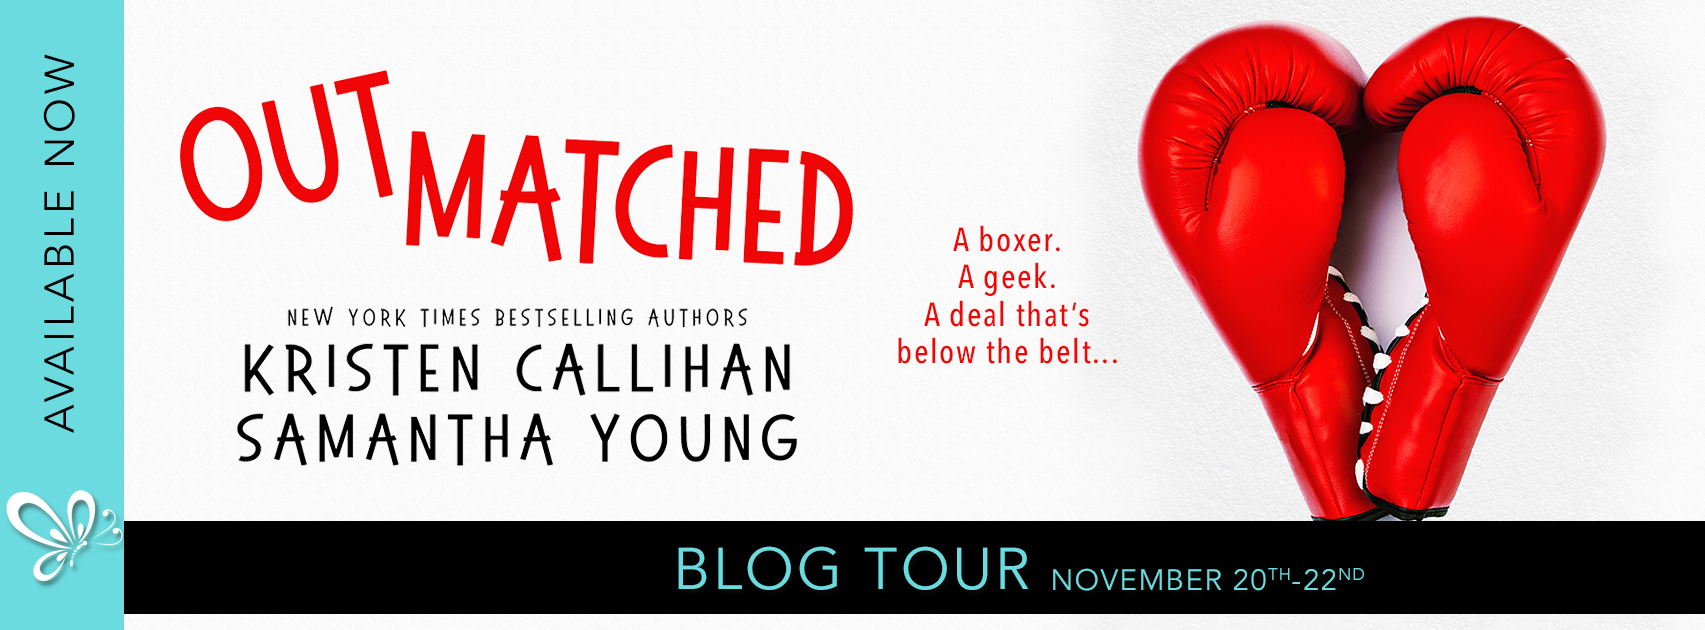 Outmatched by Kristen Callihan and Samantha Young